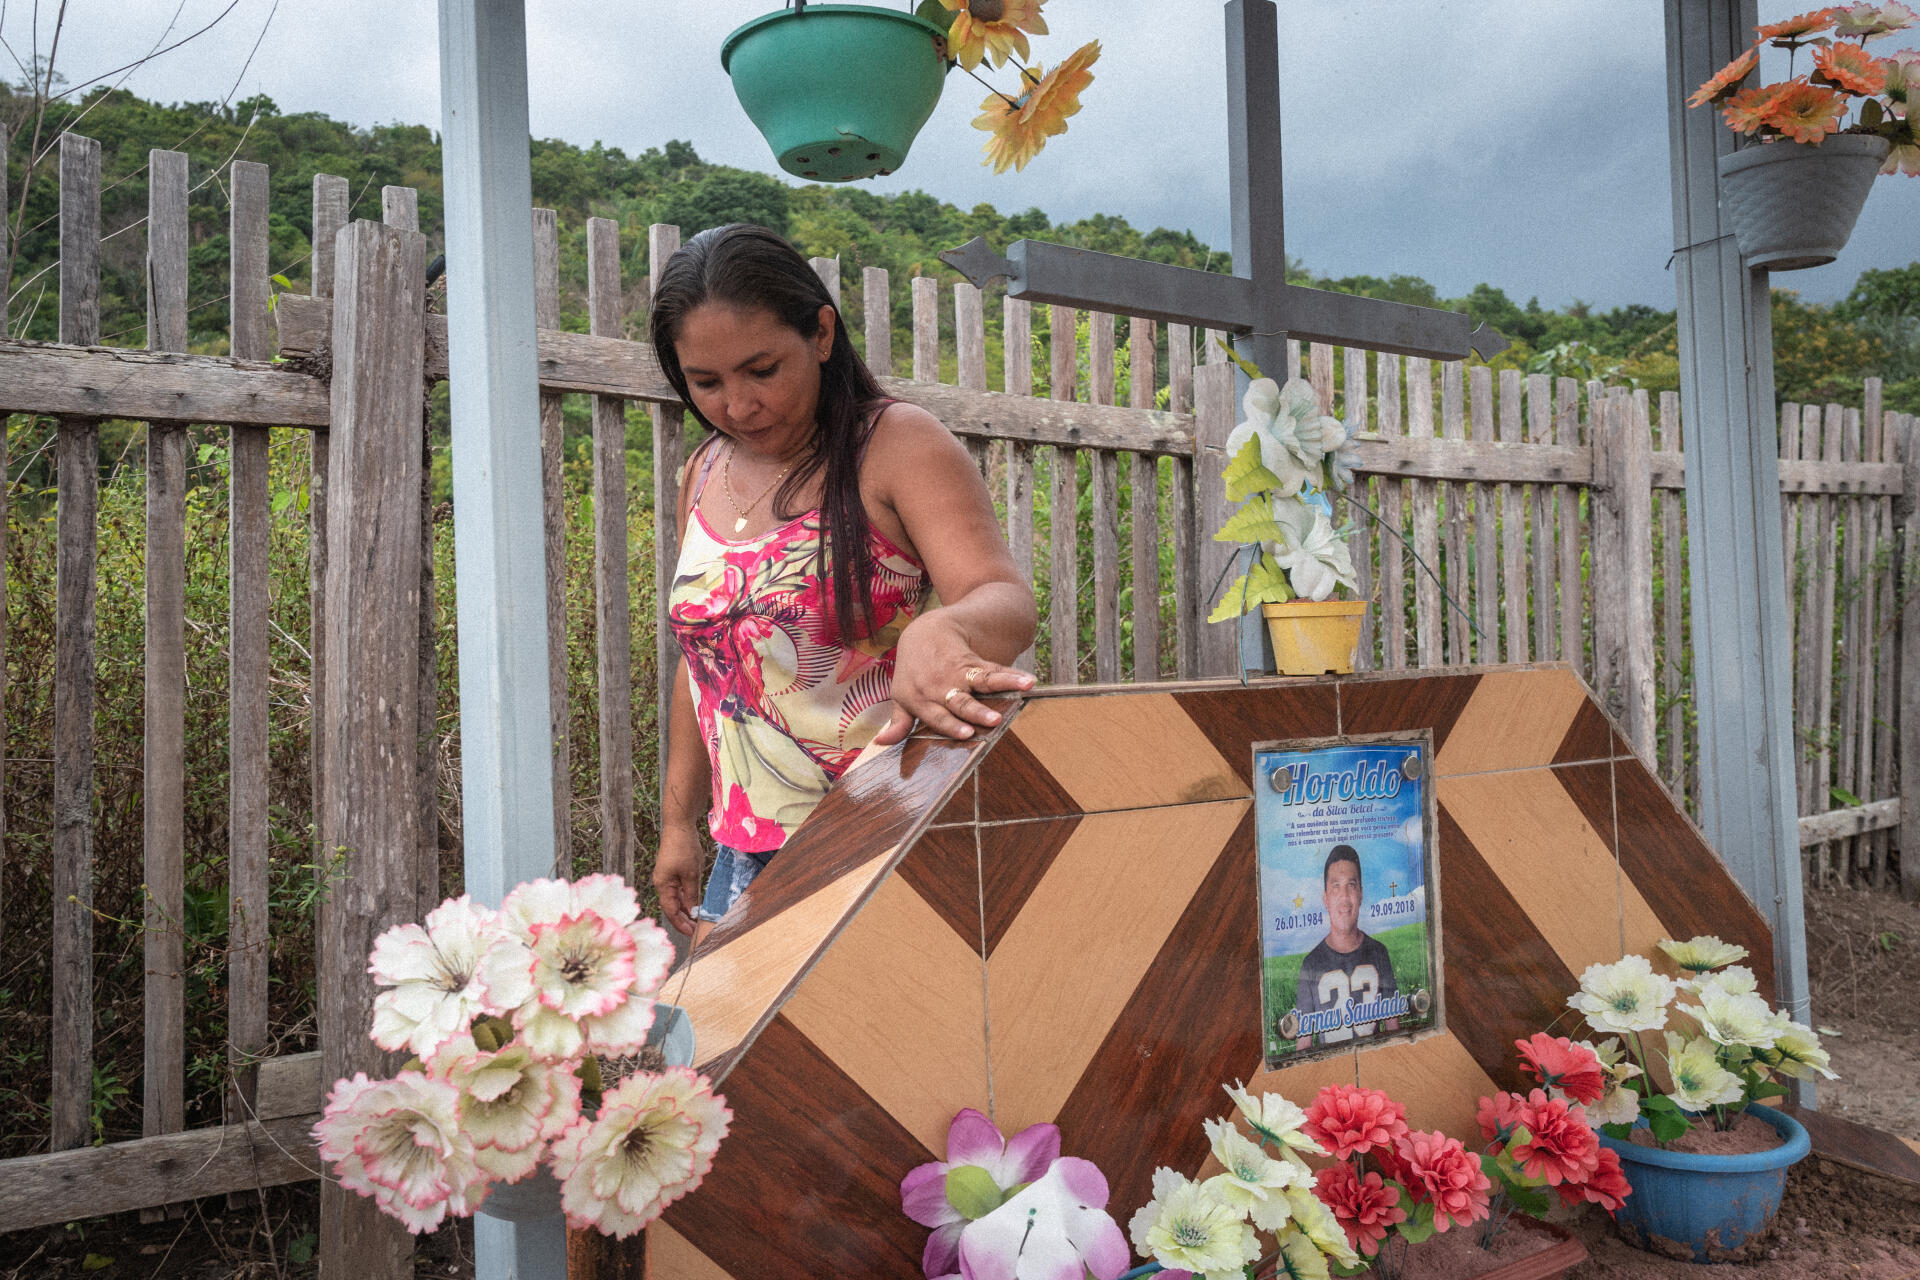 Cleia, 41, the widow of Haroldo Betcel, visiting his grave.  “I always told him to be careful and not to get in trouble.  But Haroldo was that kind of person, he was too sensitive to land issues.  He was defending his community by any means possible.”